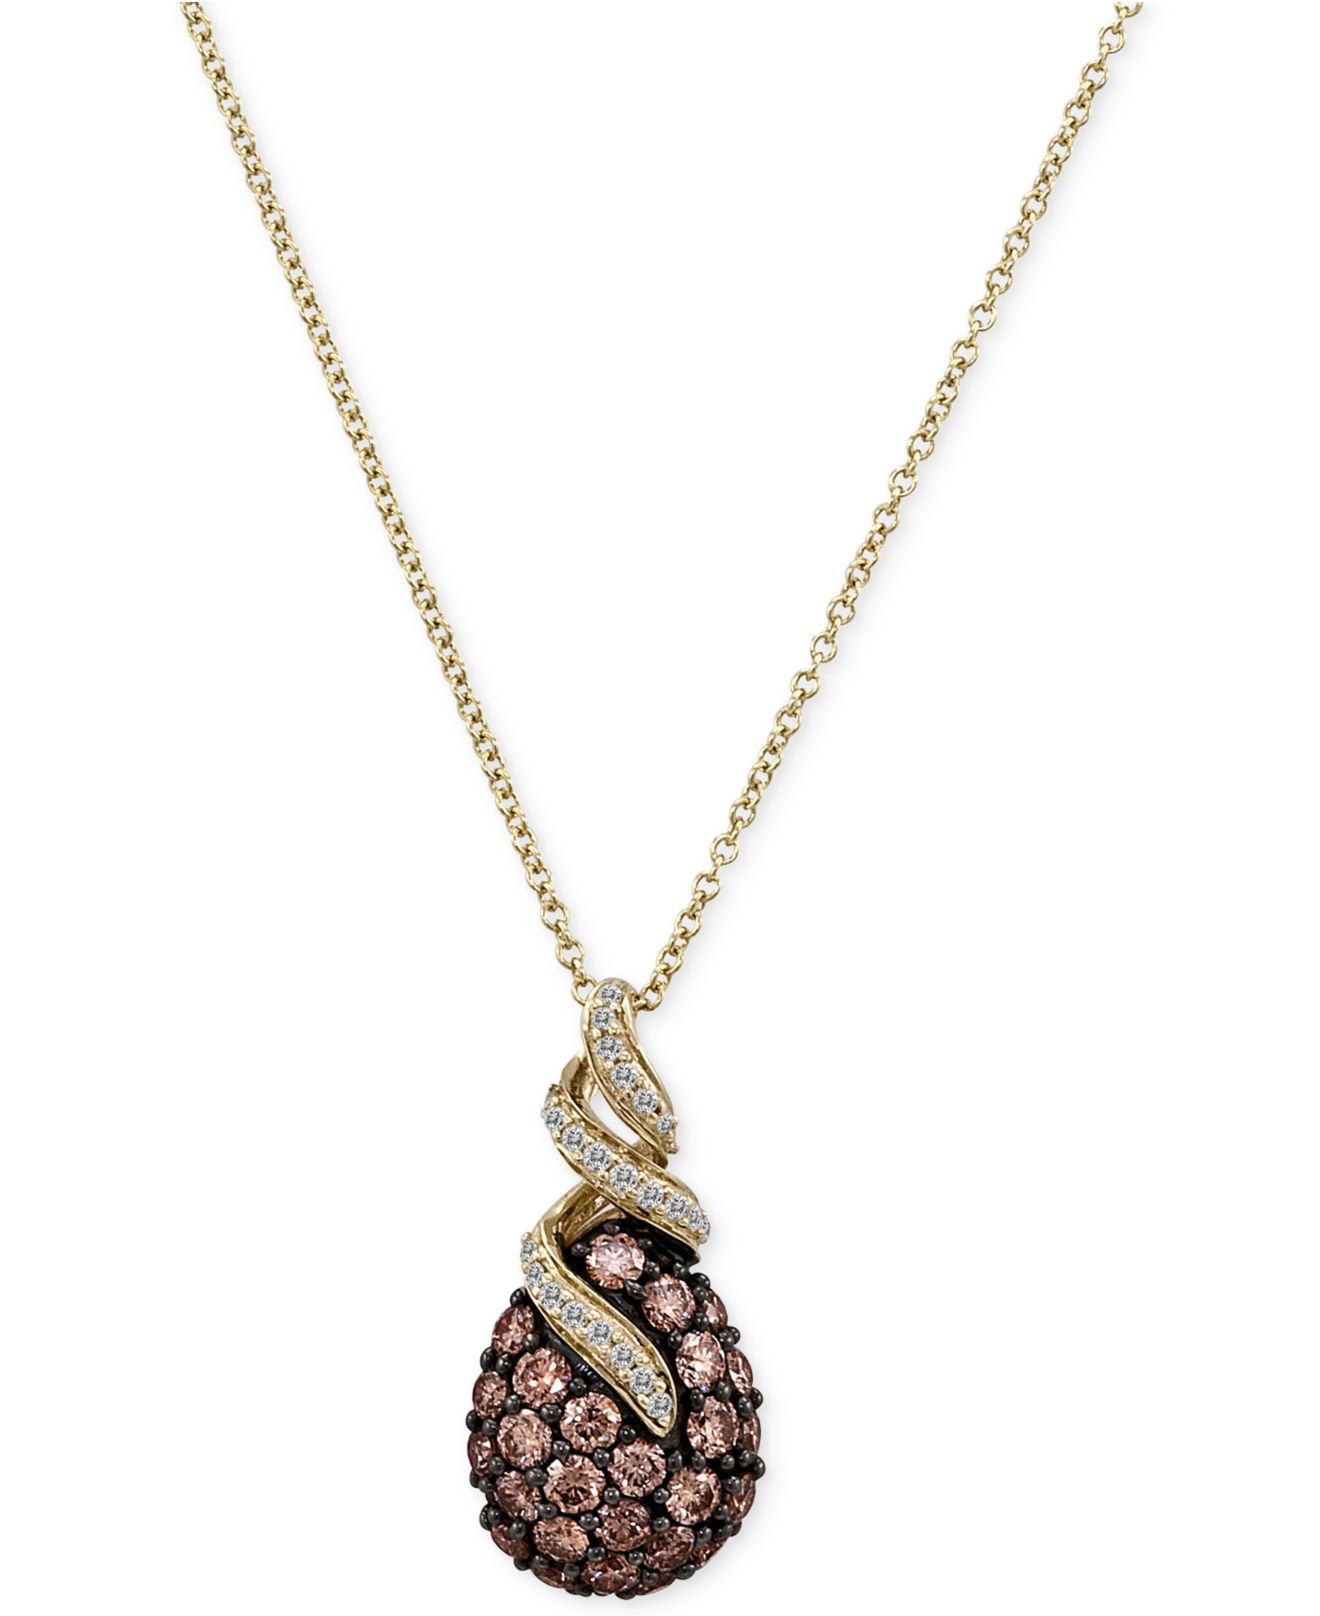 Le Vian Chocolate Chocolatierr Chocolate Diamond Pendant Necklace 1 18 Ct Tw In 14k Gold Brown Product 0 315661942 Normal 